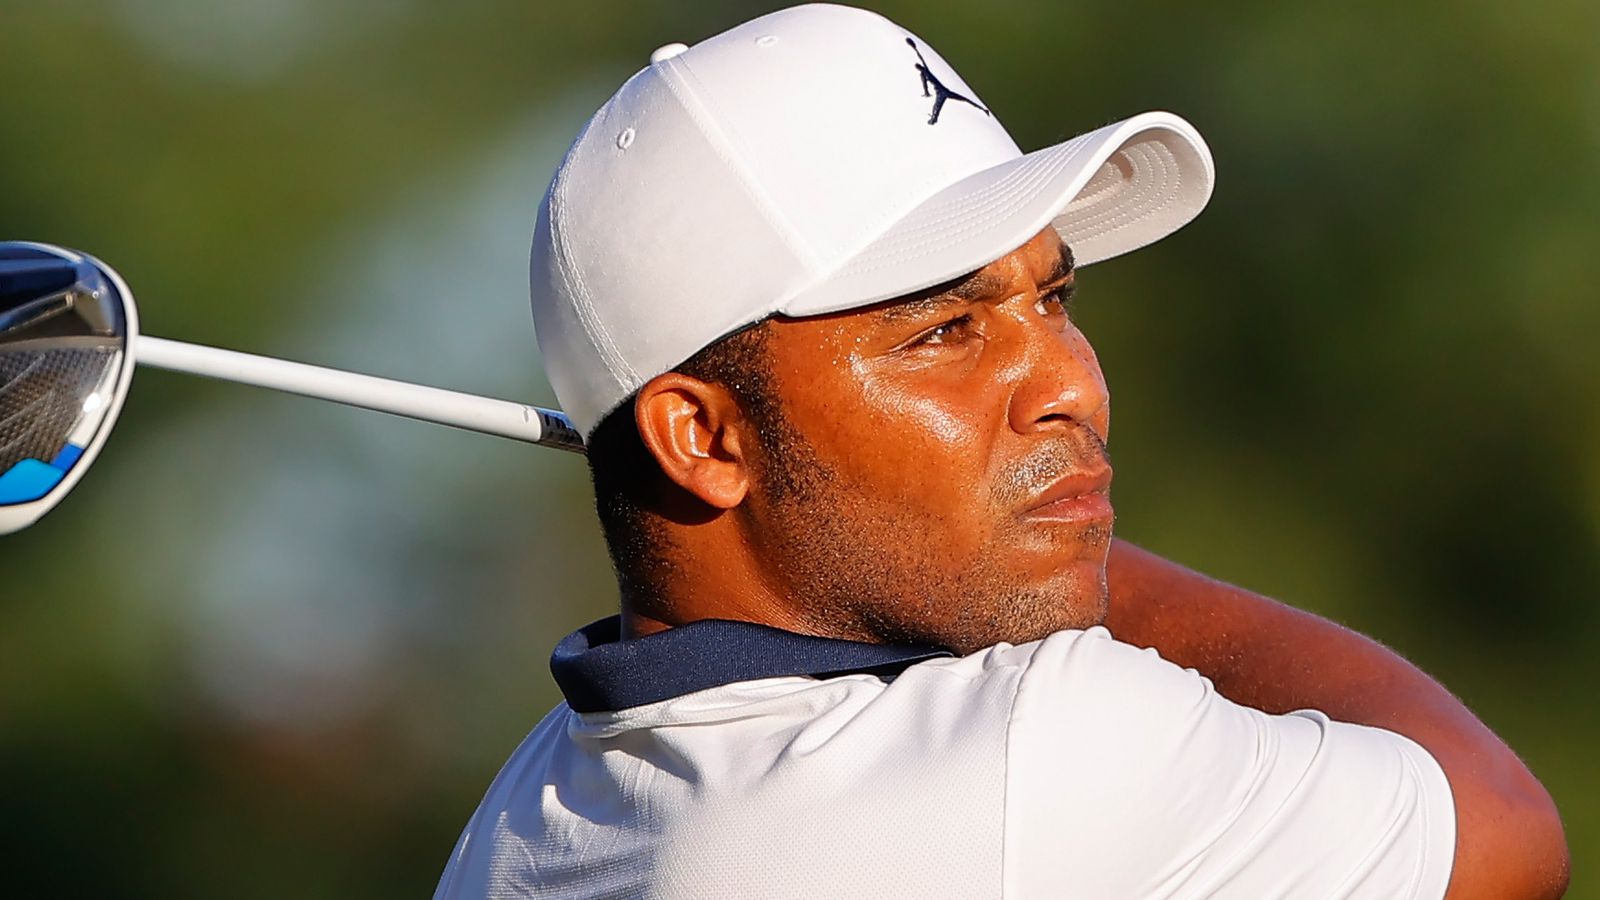 Harold Varner III leads at Colonial with Rory McIlroy in contention